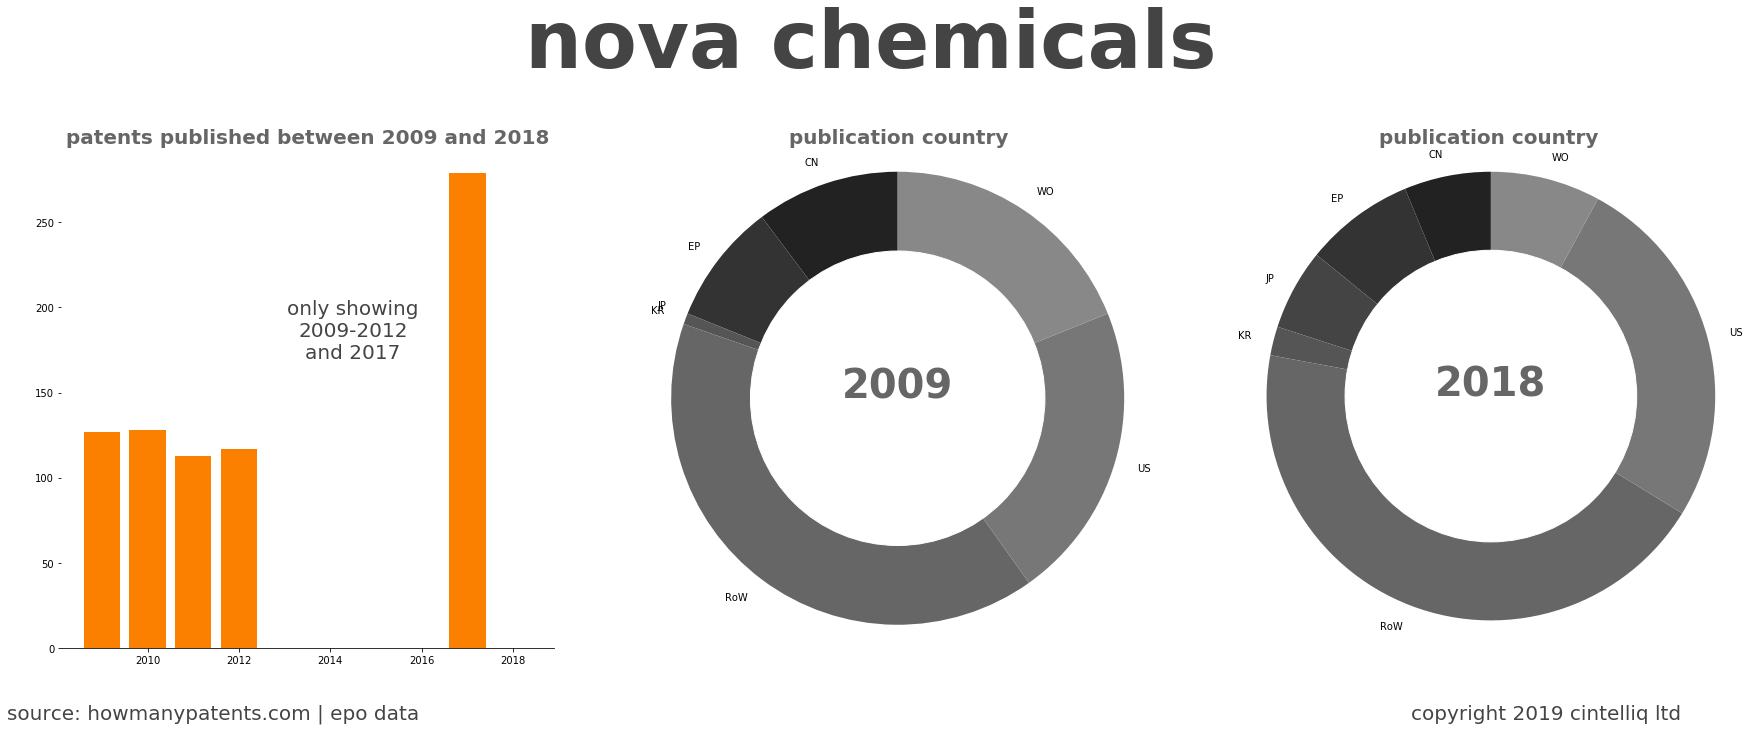 summary of patents for Nova Chemicals